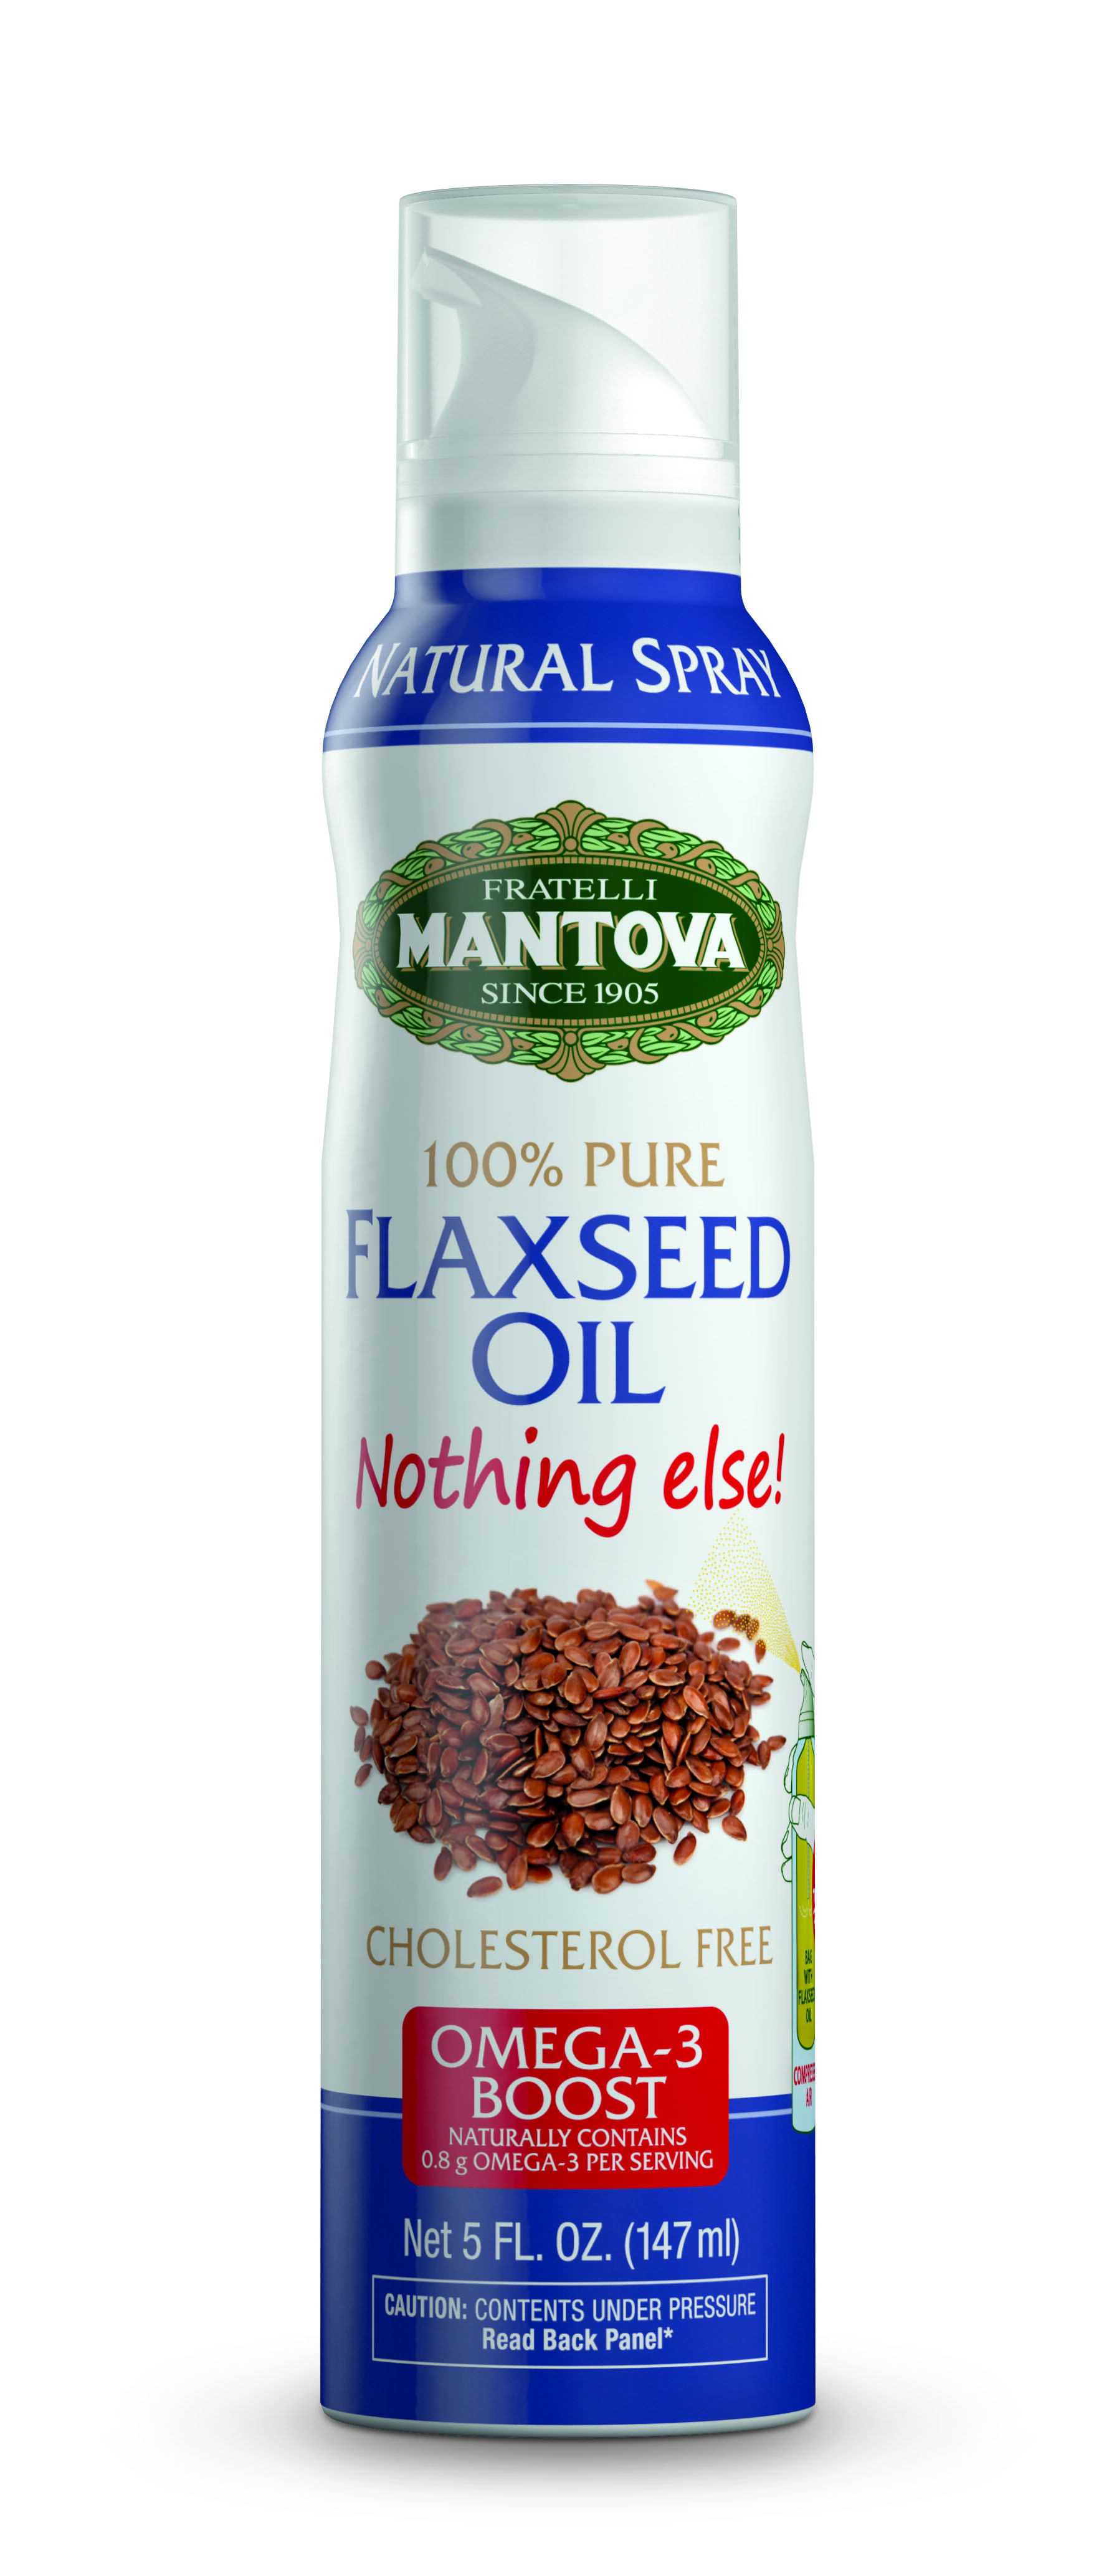 Flaxseed oil is a natural source of Omega-3 by Fine Italian Food